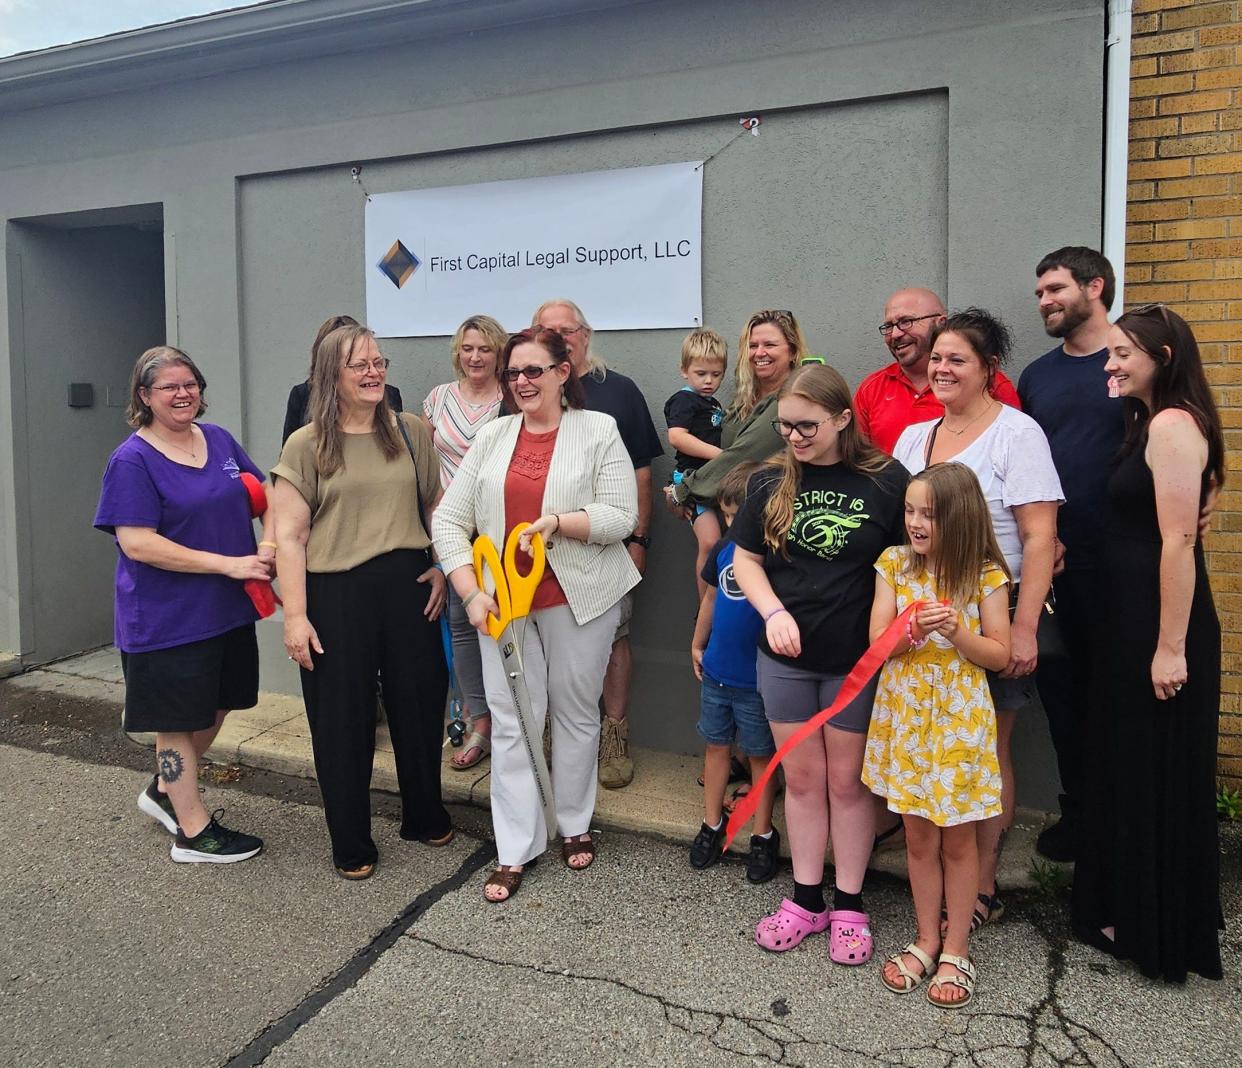 Those at First Capital Legal Support cut the ribbon celebrating the opening of its new visitation center.